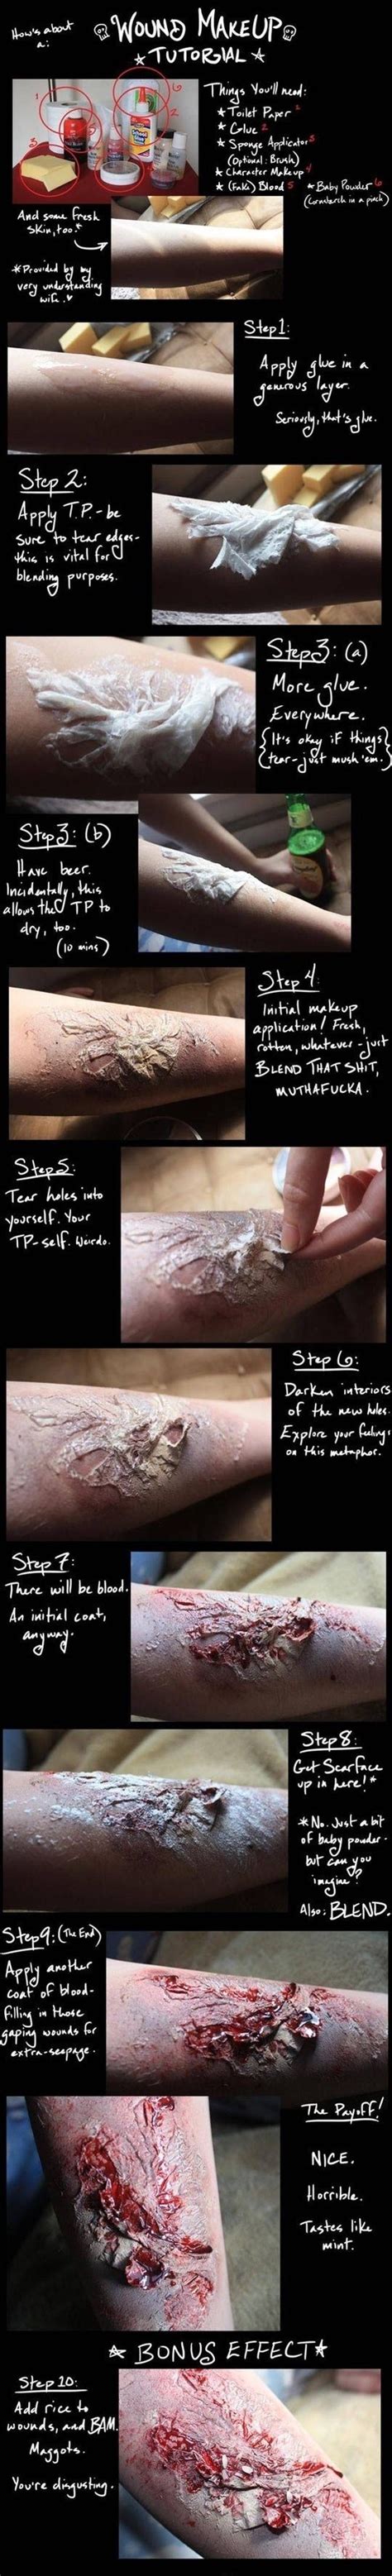 Wound Makeup Tutorial Pictures Photos And Images For Facebook Tumblr